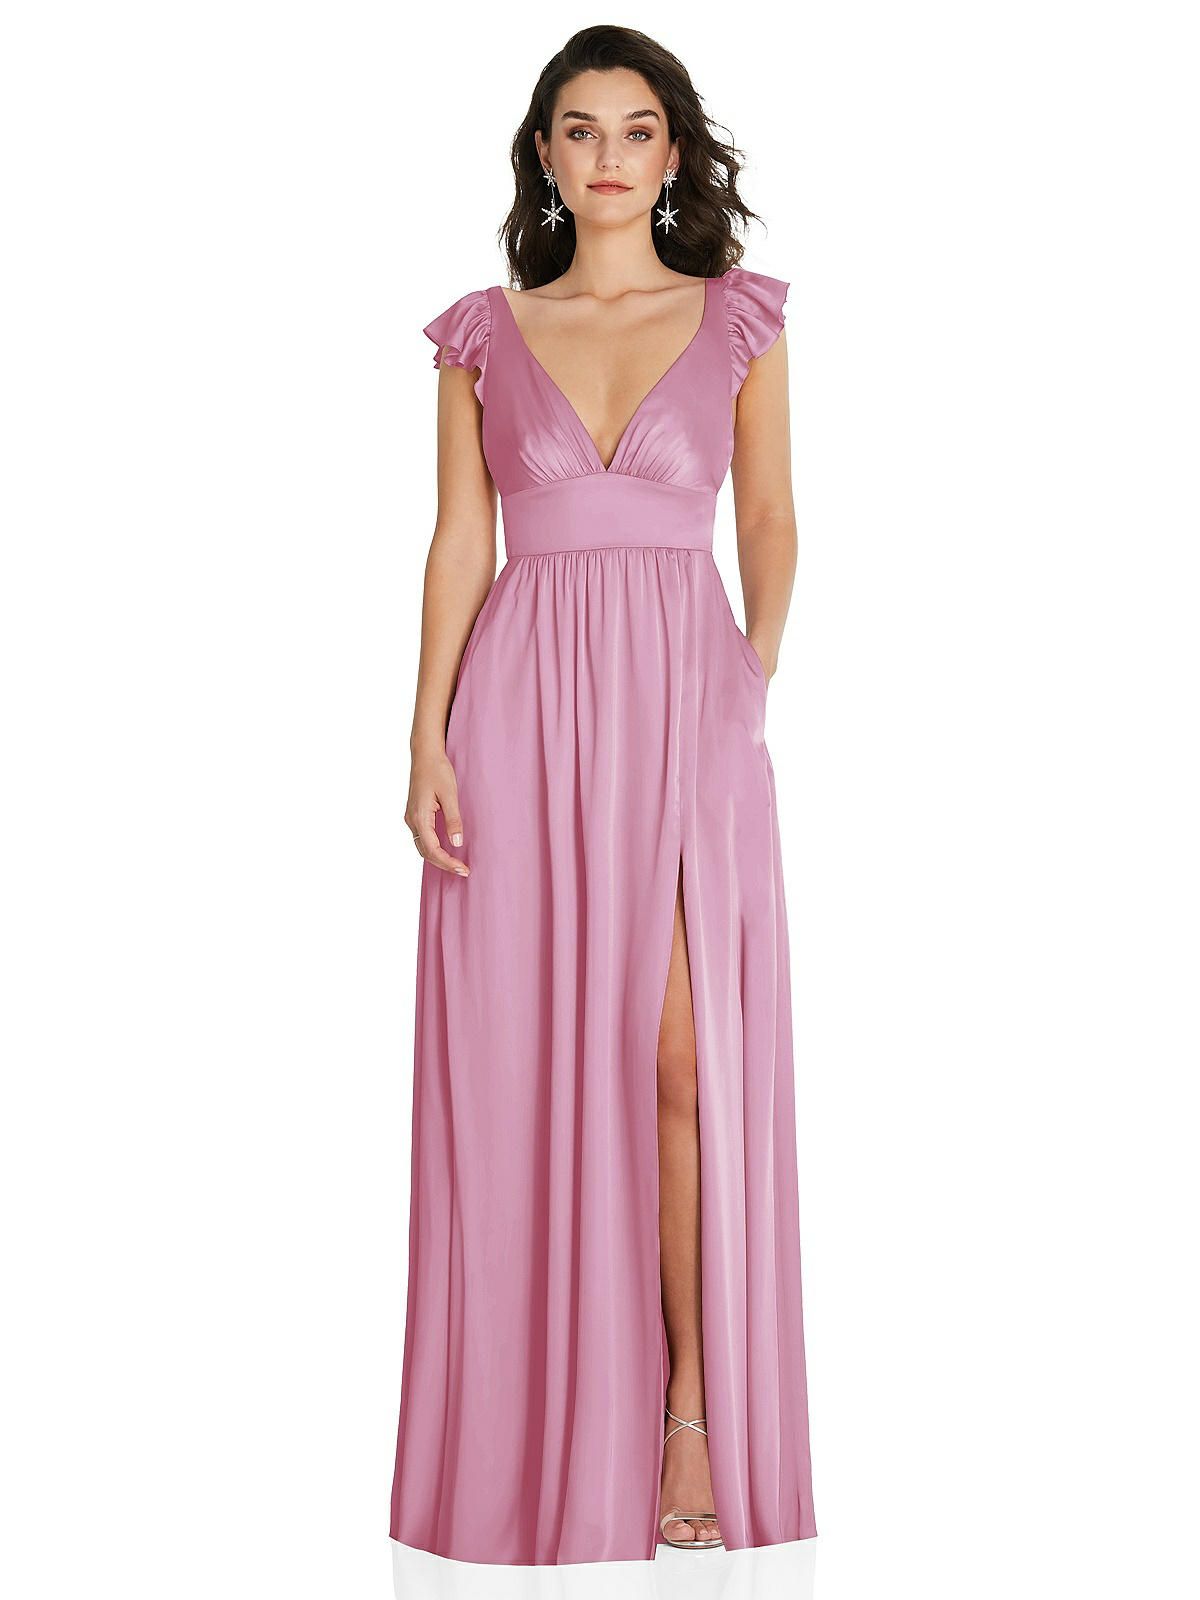 Deep V-Neck Ruffle Cap Sleeve Maxi Dress with Convertible Straps | The Dessy Group